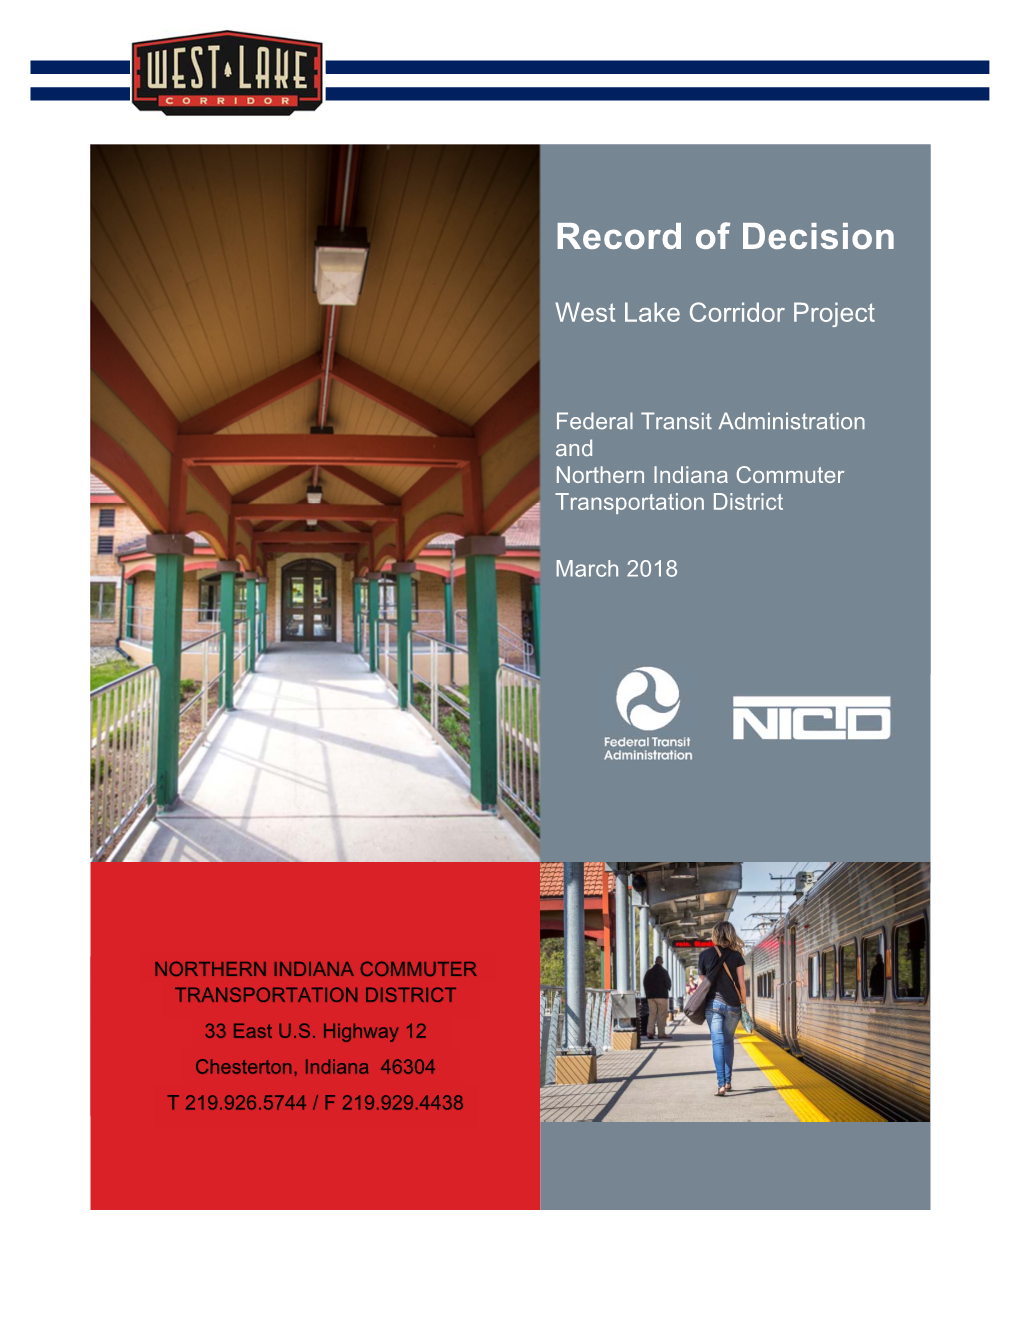 West Lake Corridor Final Environmental Impact Statement/Record of Decision and Section 4(F) Evaluation; Record of Decision